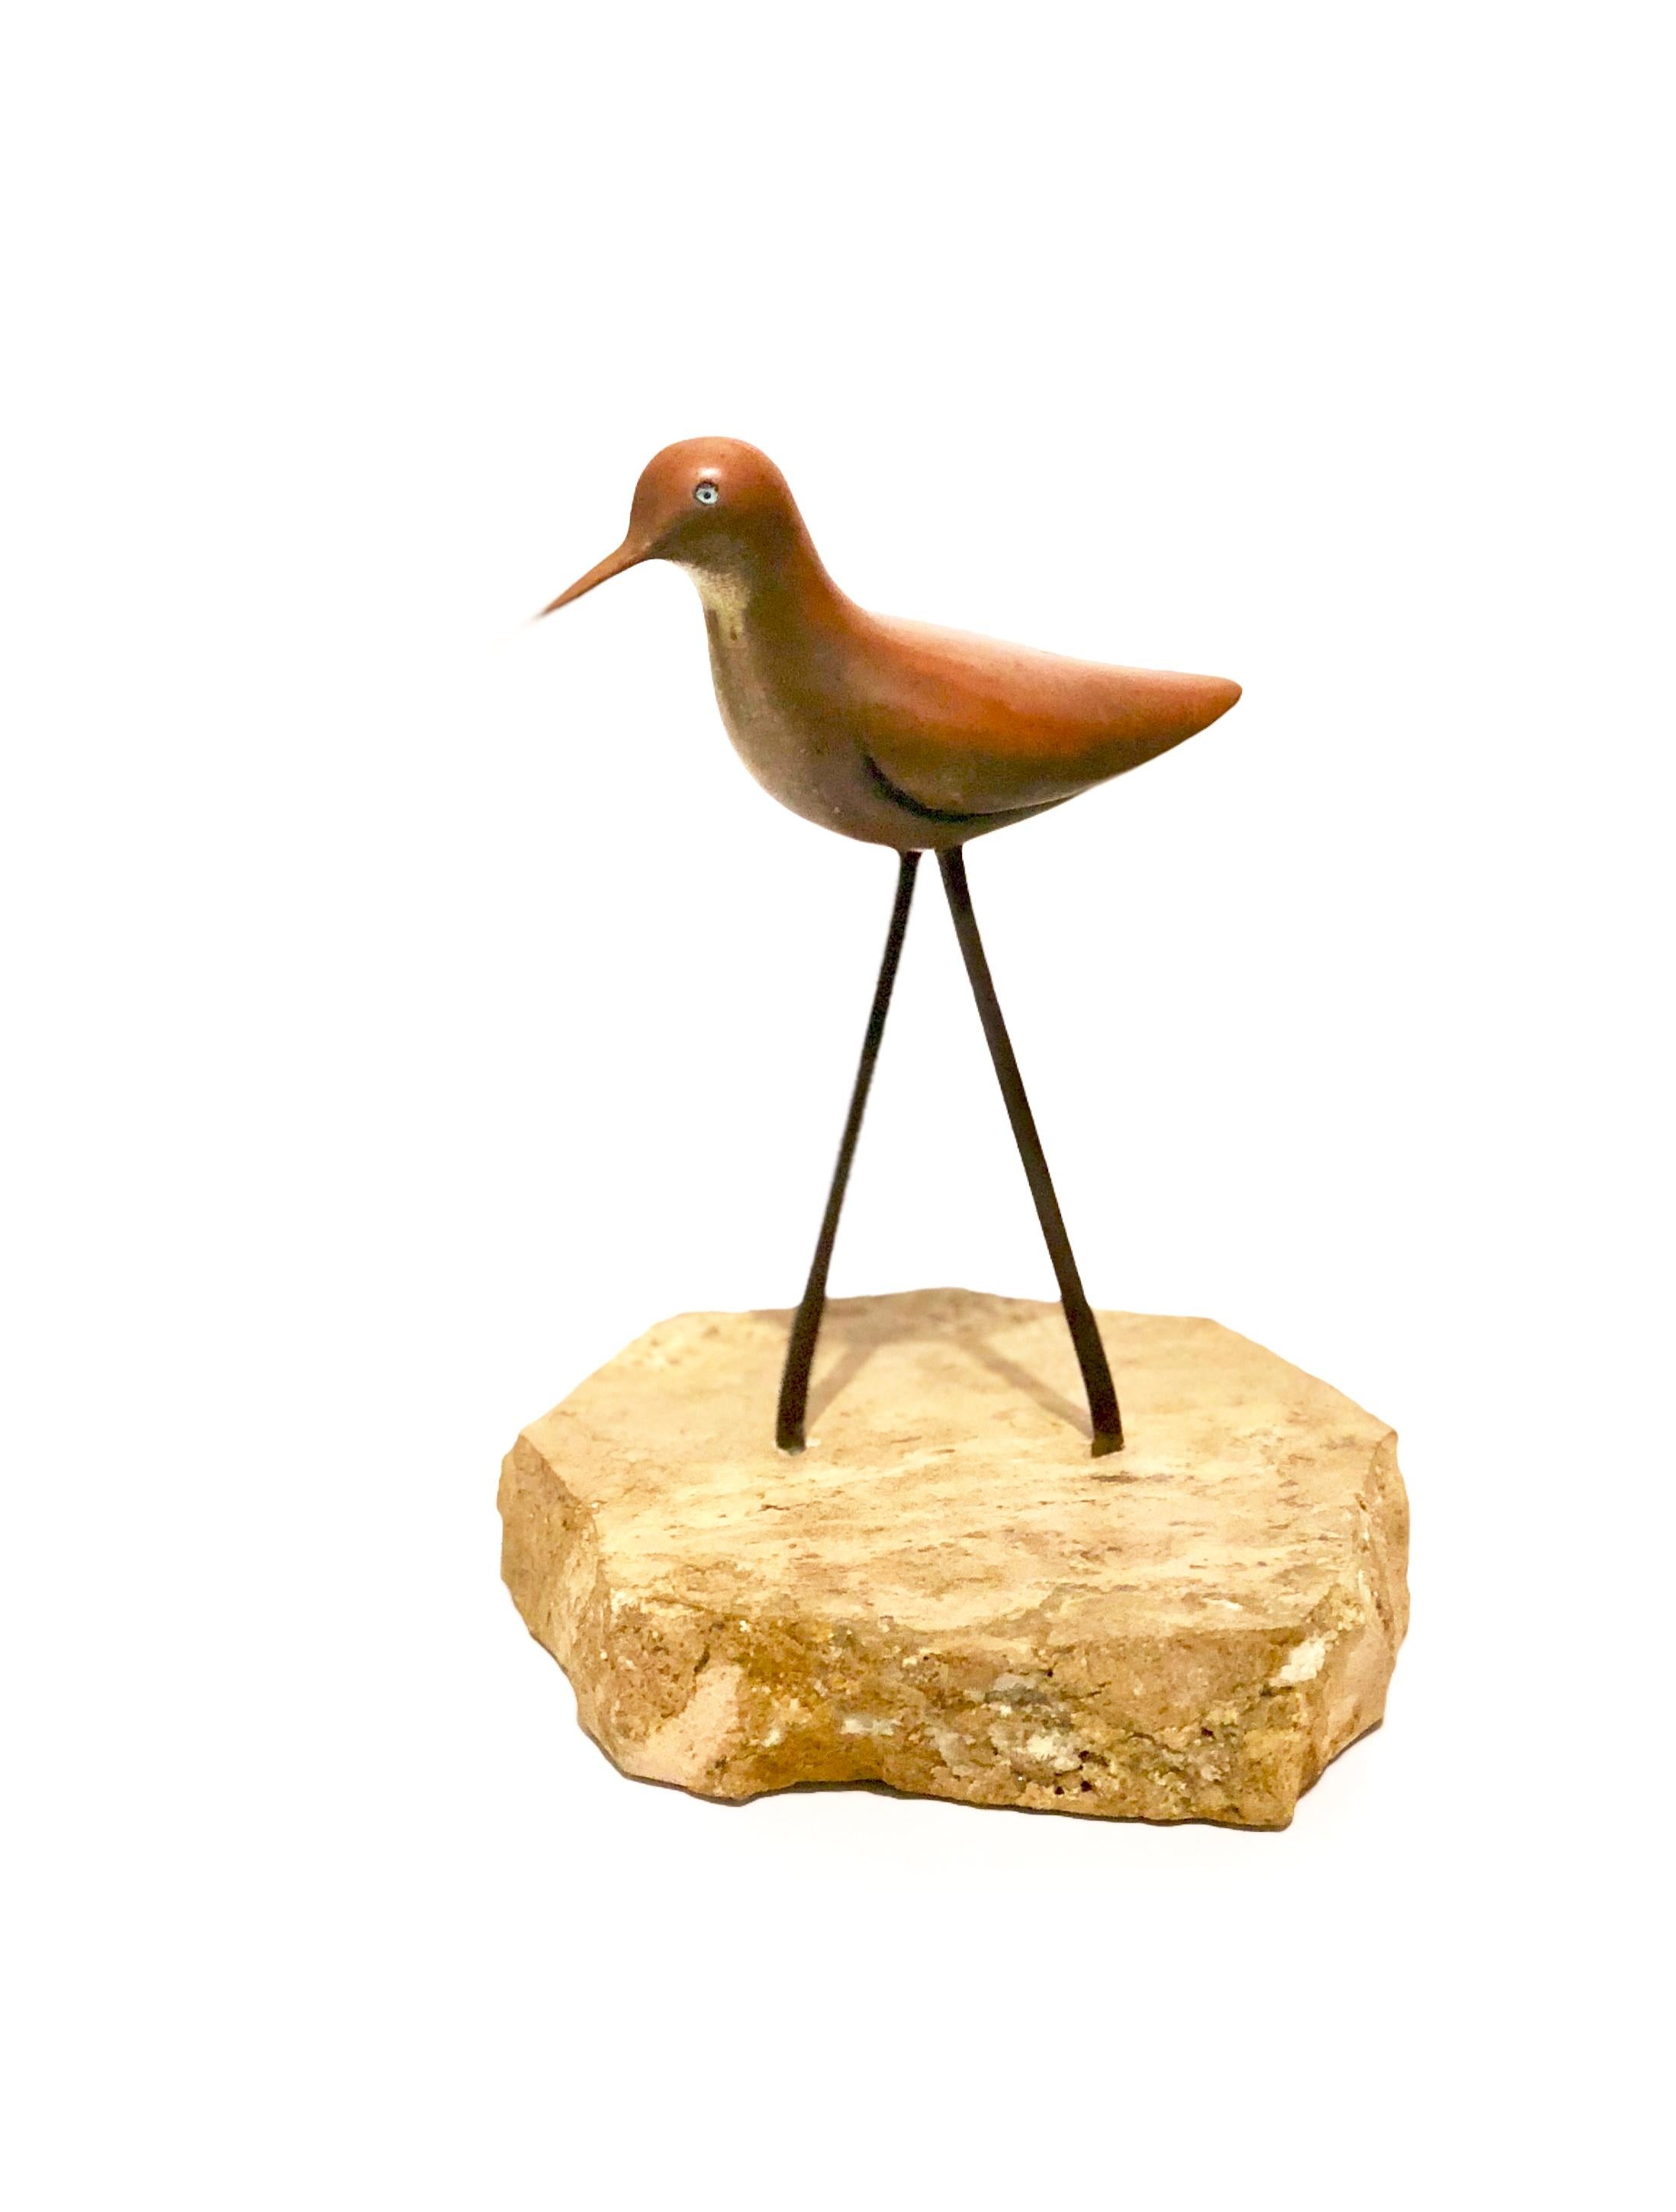 A delicate solid brass small sculpture of a bird sitting on solid marble base, circa 1970s we believe its made by Studio Jere. Great patina that can be polished if wanted.